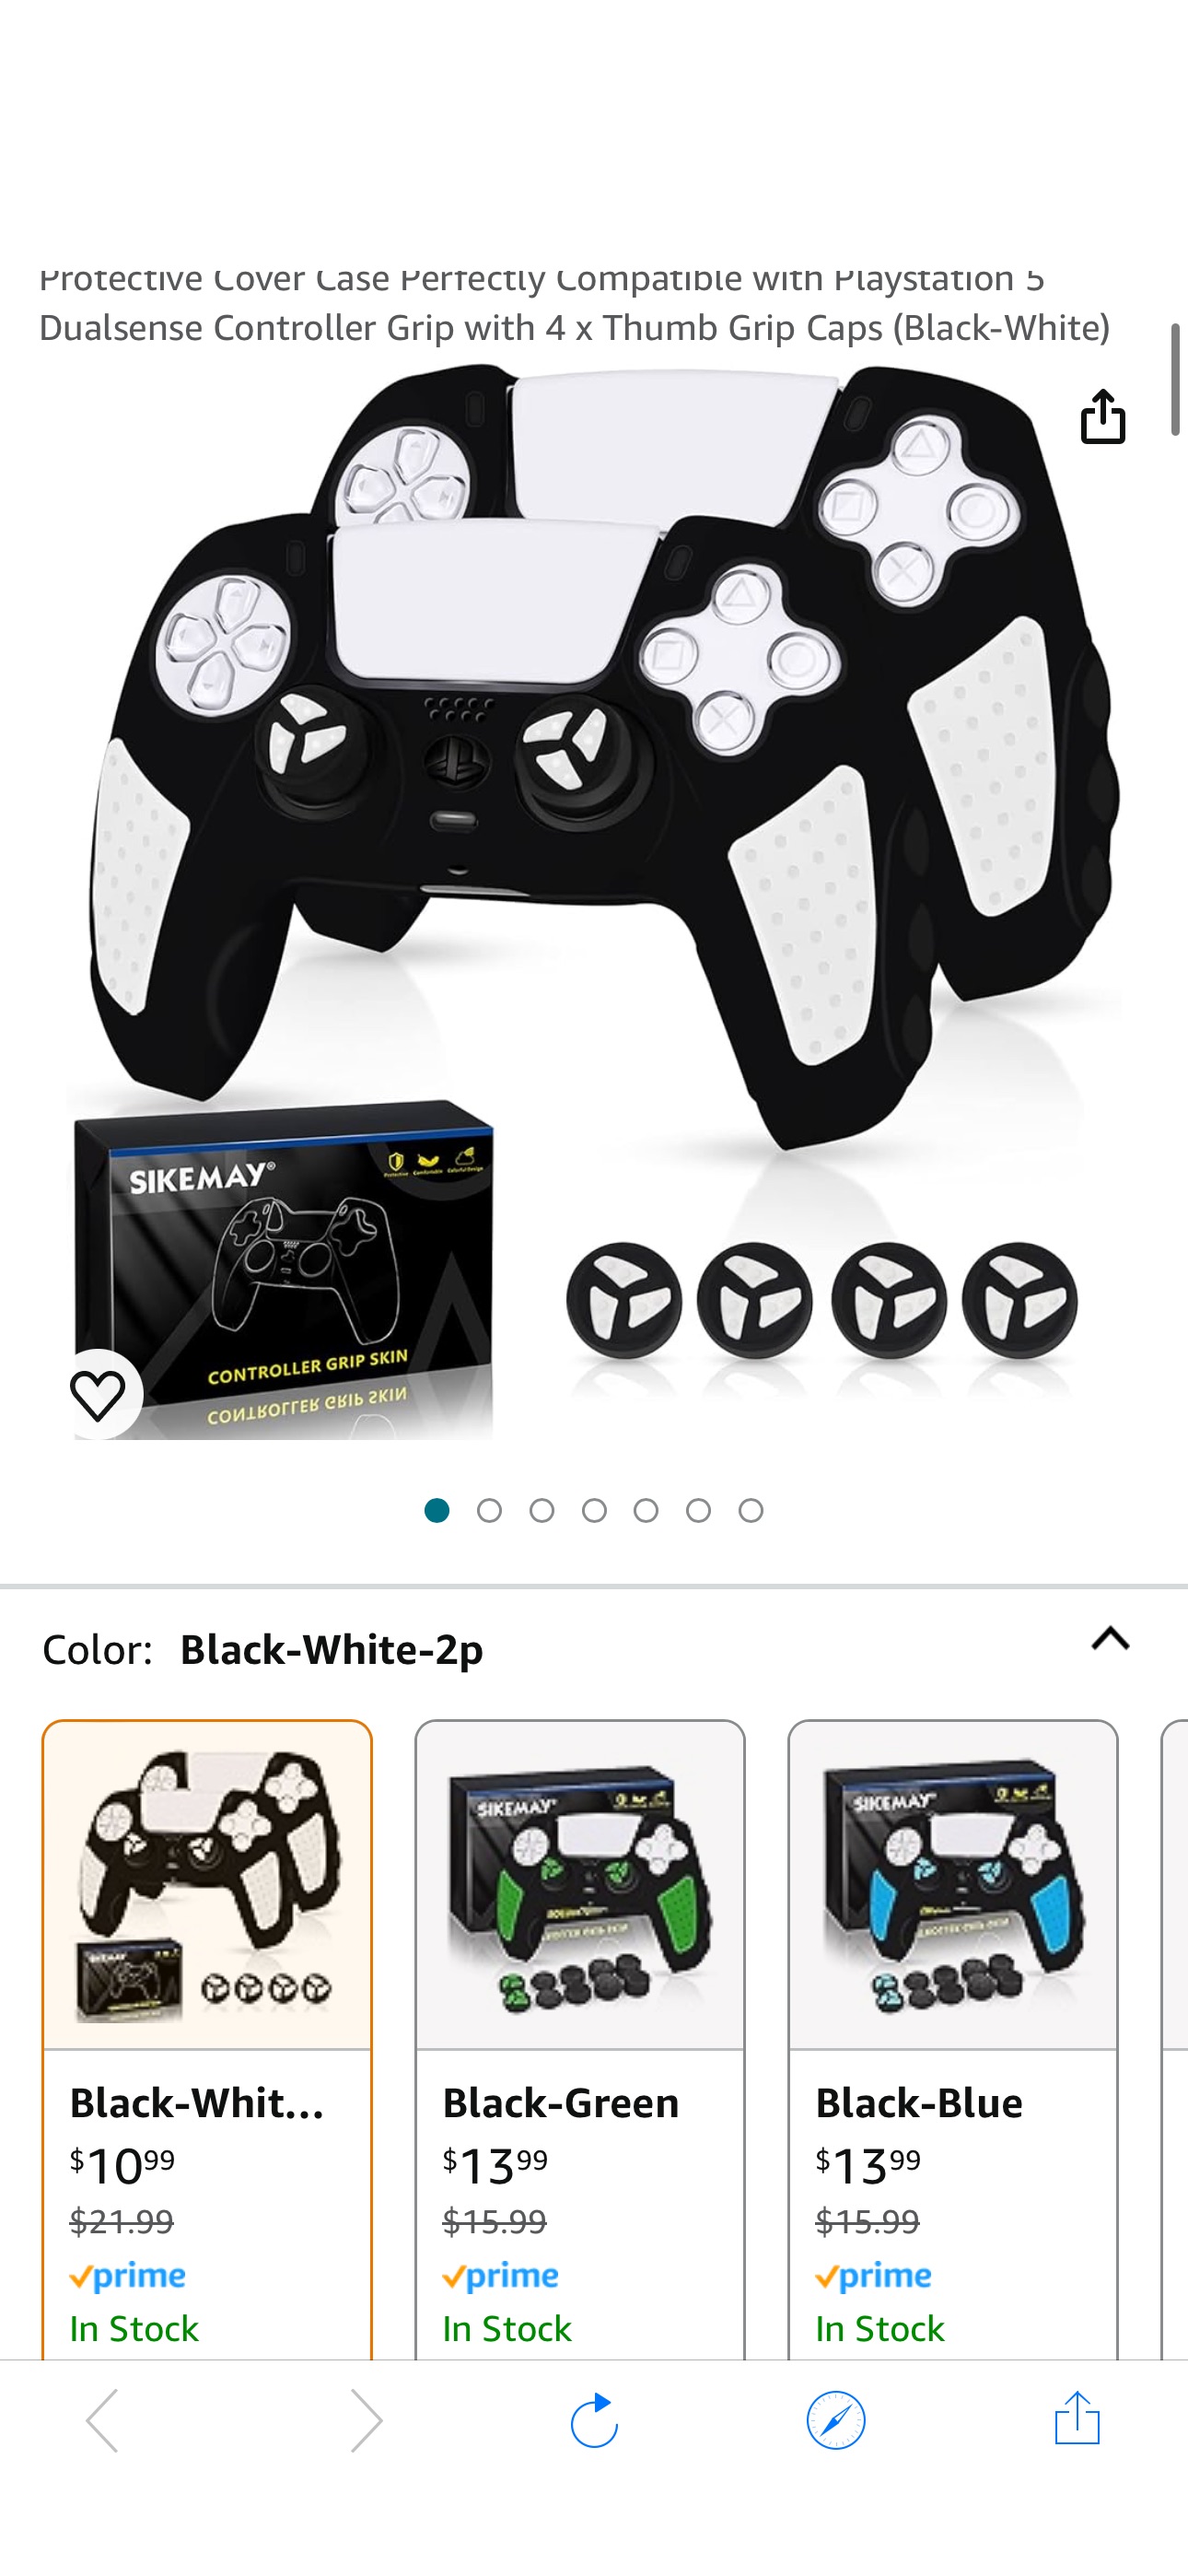 Amazon.com: SIKEMAY [2 Pack PS5 Controller Skin, Anti-Slip Thicken Silicone Protective Cover Case Perfectly Compatible with Playstation 5 Dualsense Controller Grip with 4 x Thumb Grip Caps (Black-Whit